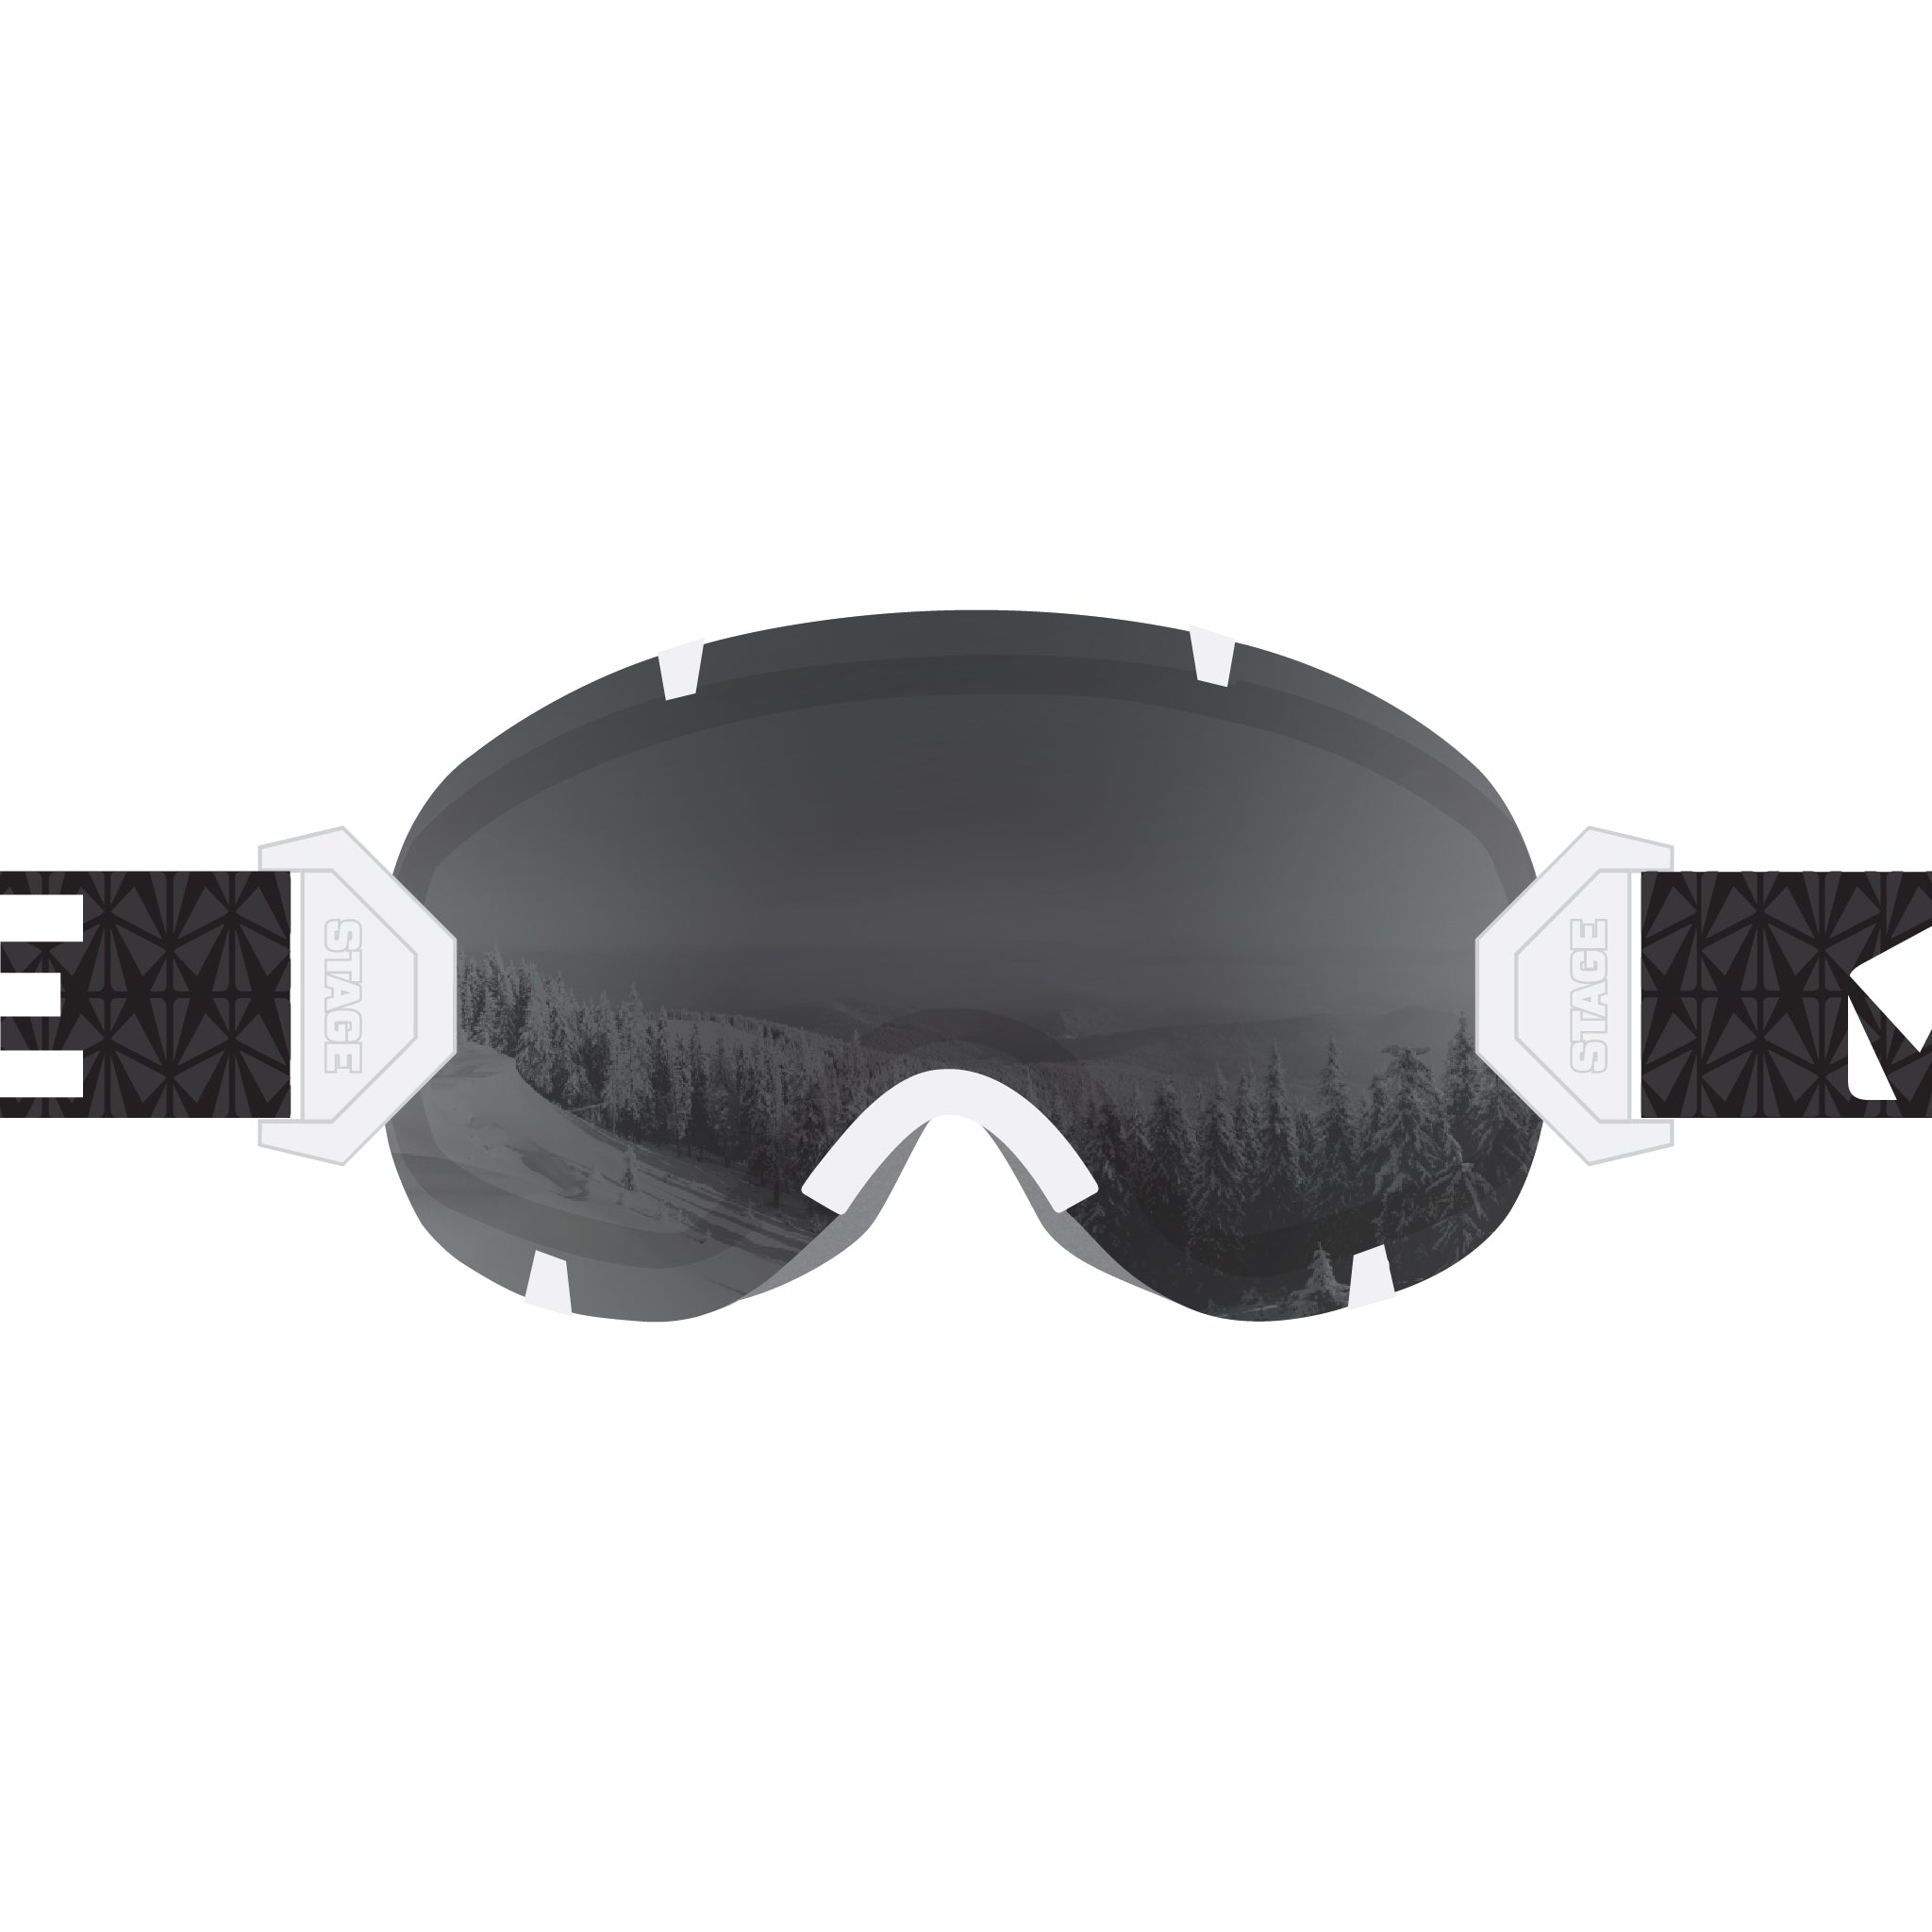 STAGE Stunt Ski Goggle - - Interchangeable Lens and Black Strap